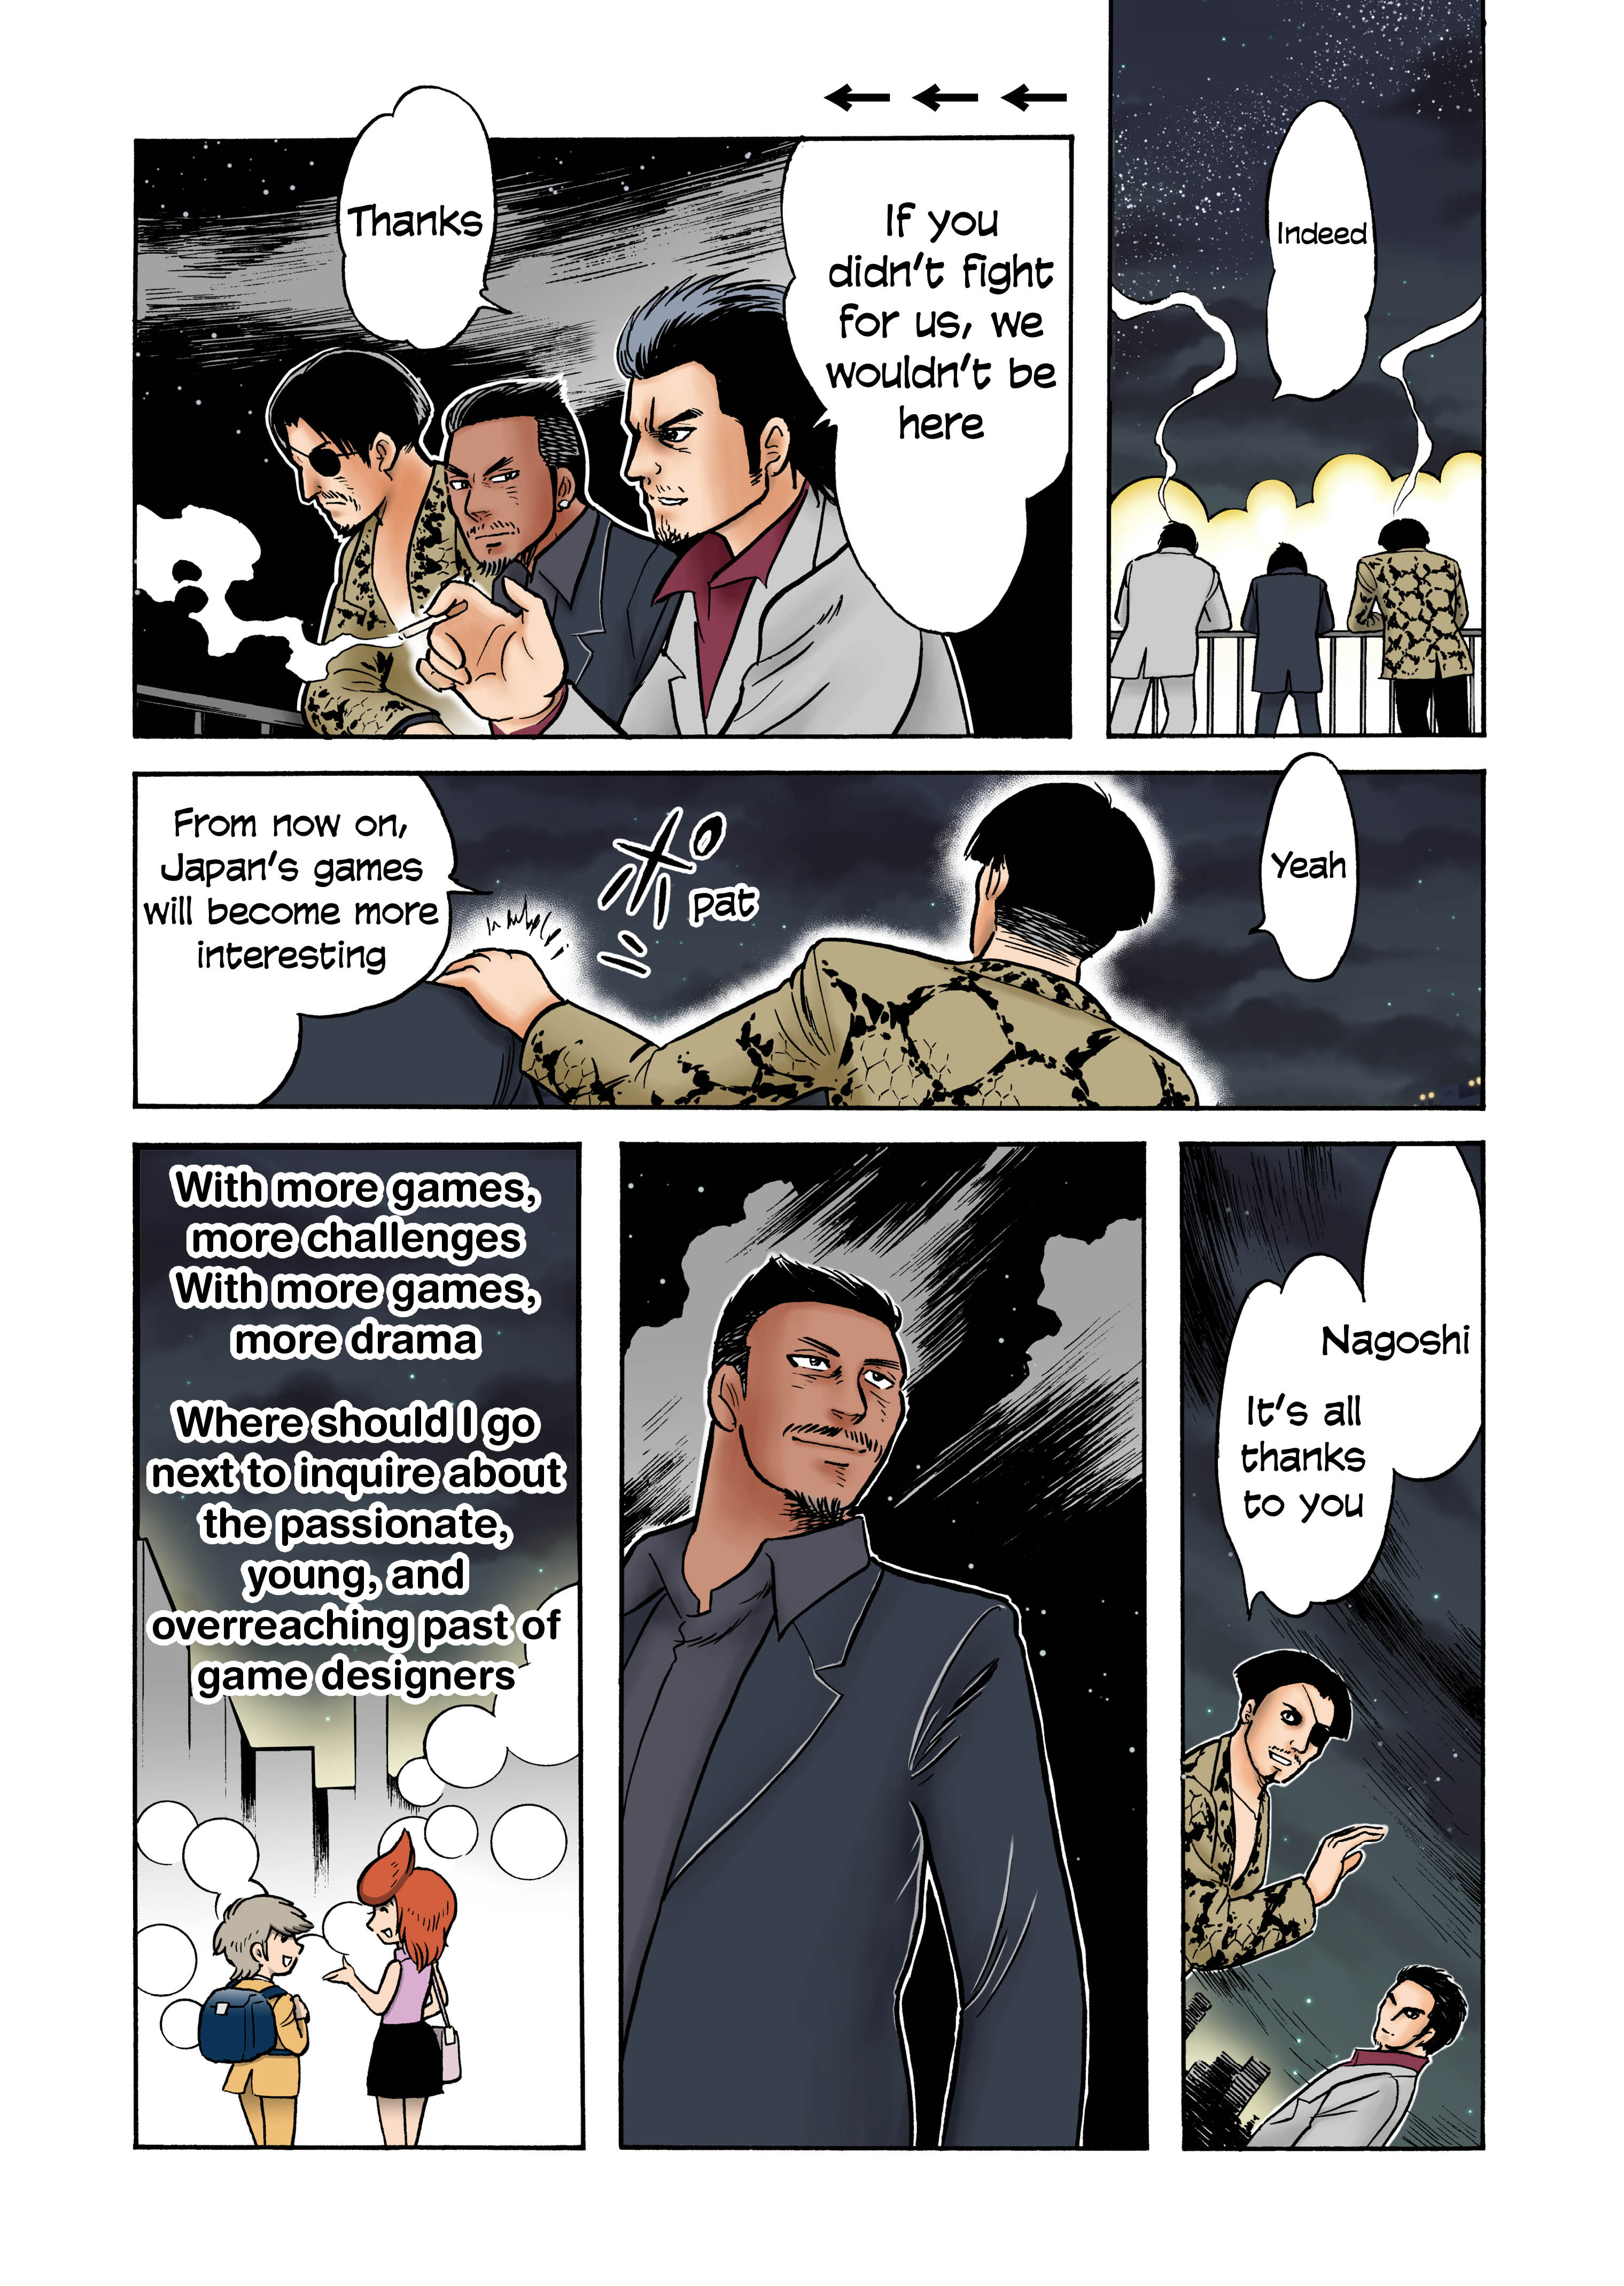 The beginning story of “Yakuza” — the battle with video game regulations, and the difficult path Toshihiro Nagoshi chose. [Passion of the Game Designers]_013